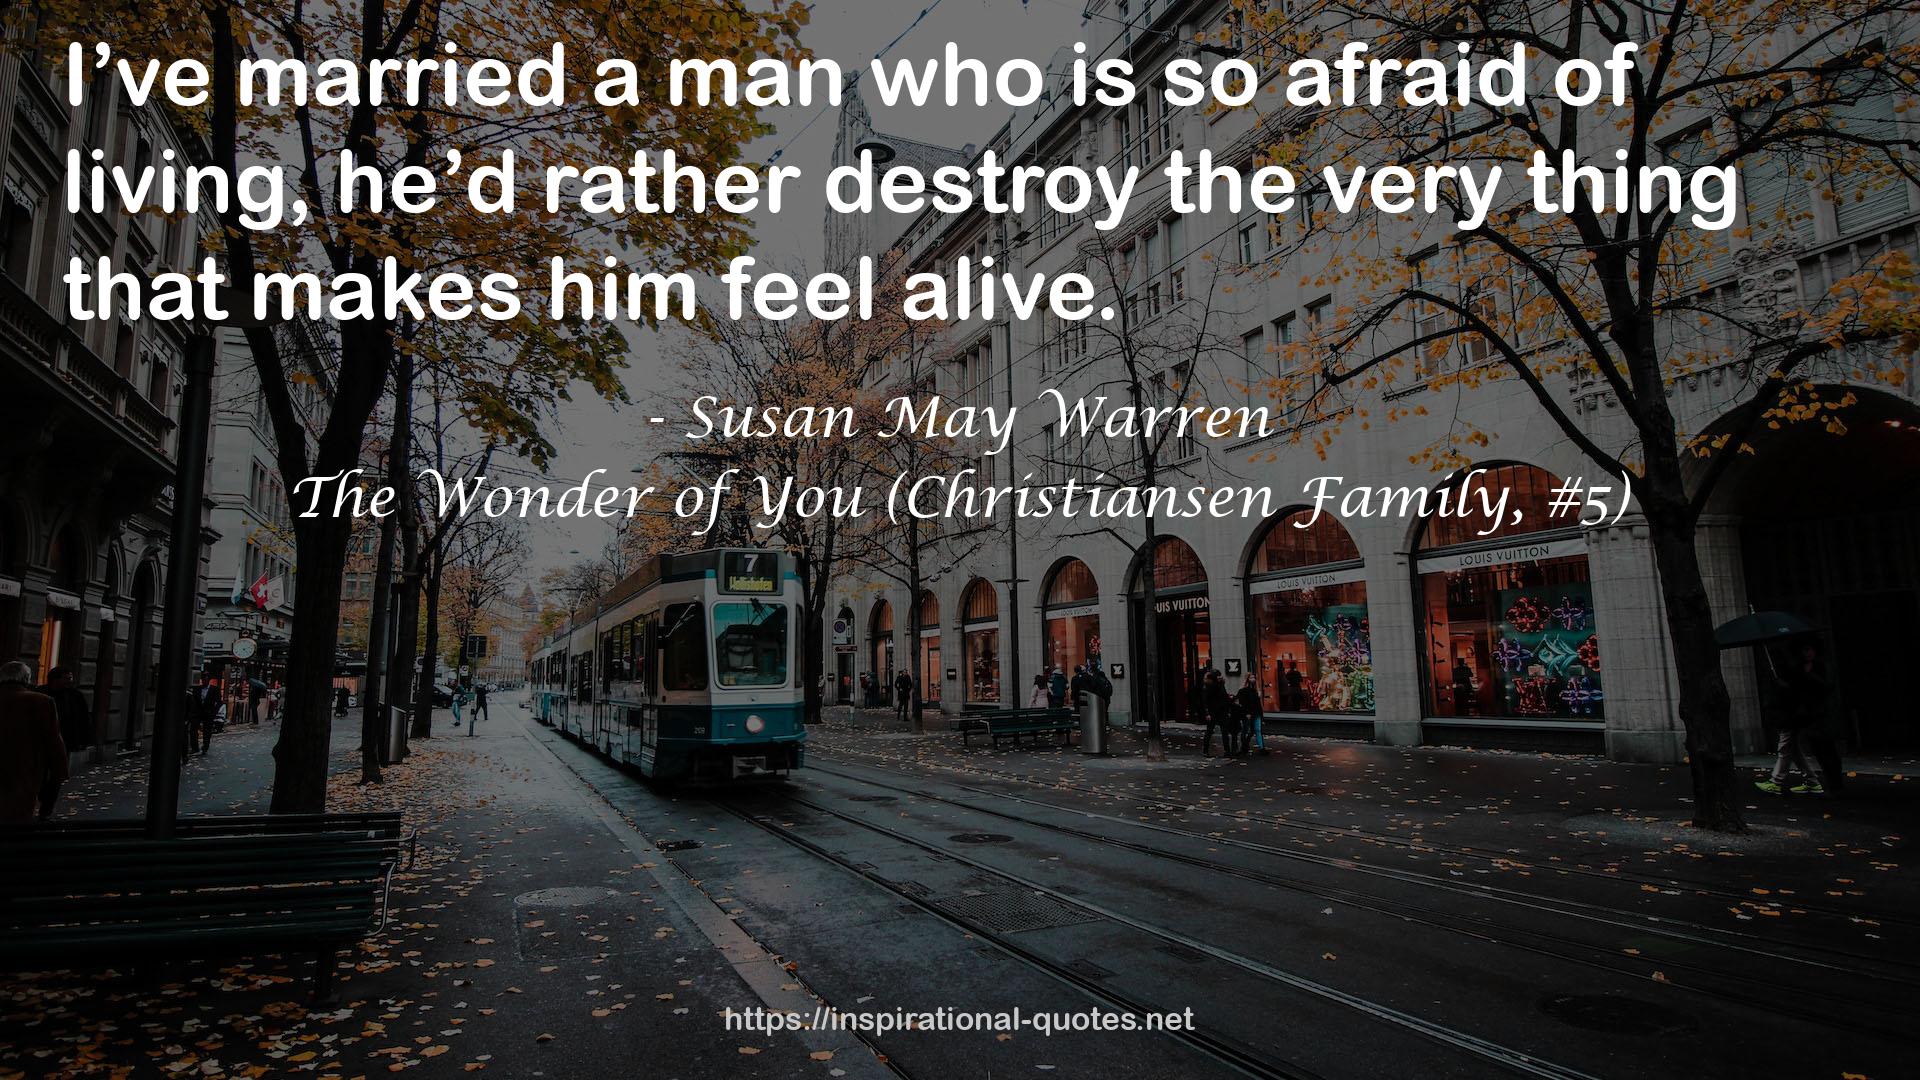 The Wonder of You (Christiansen Family, #5) QUOTES